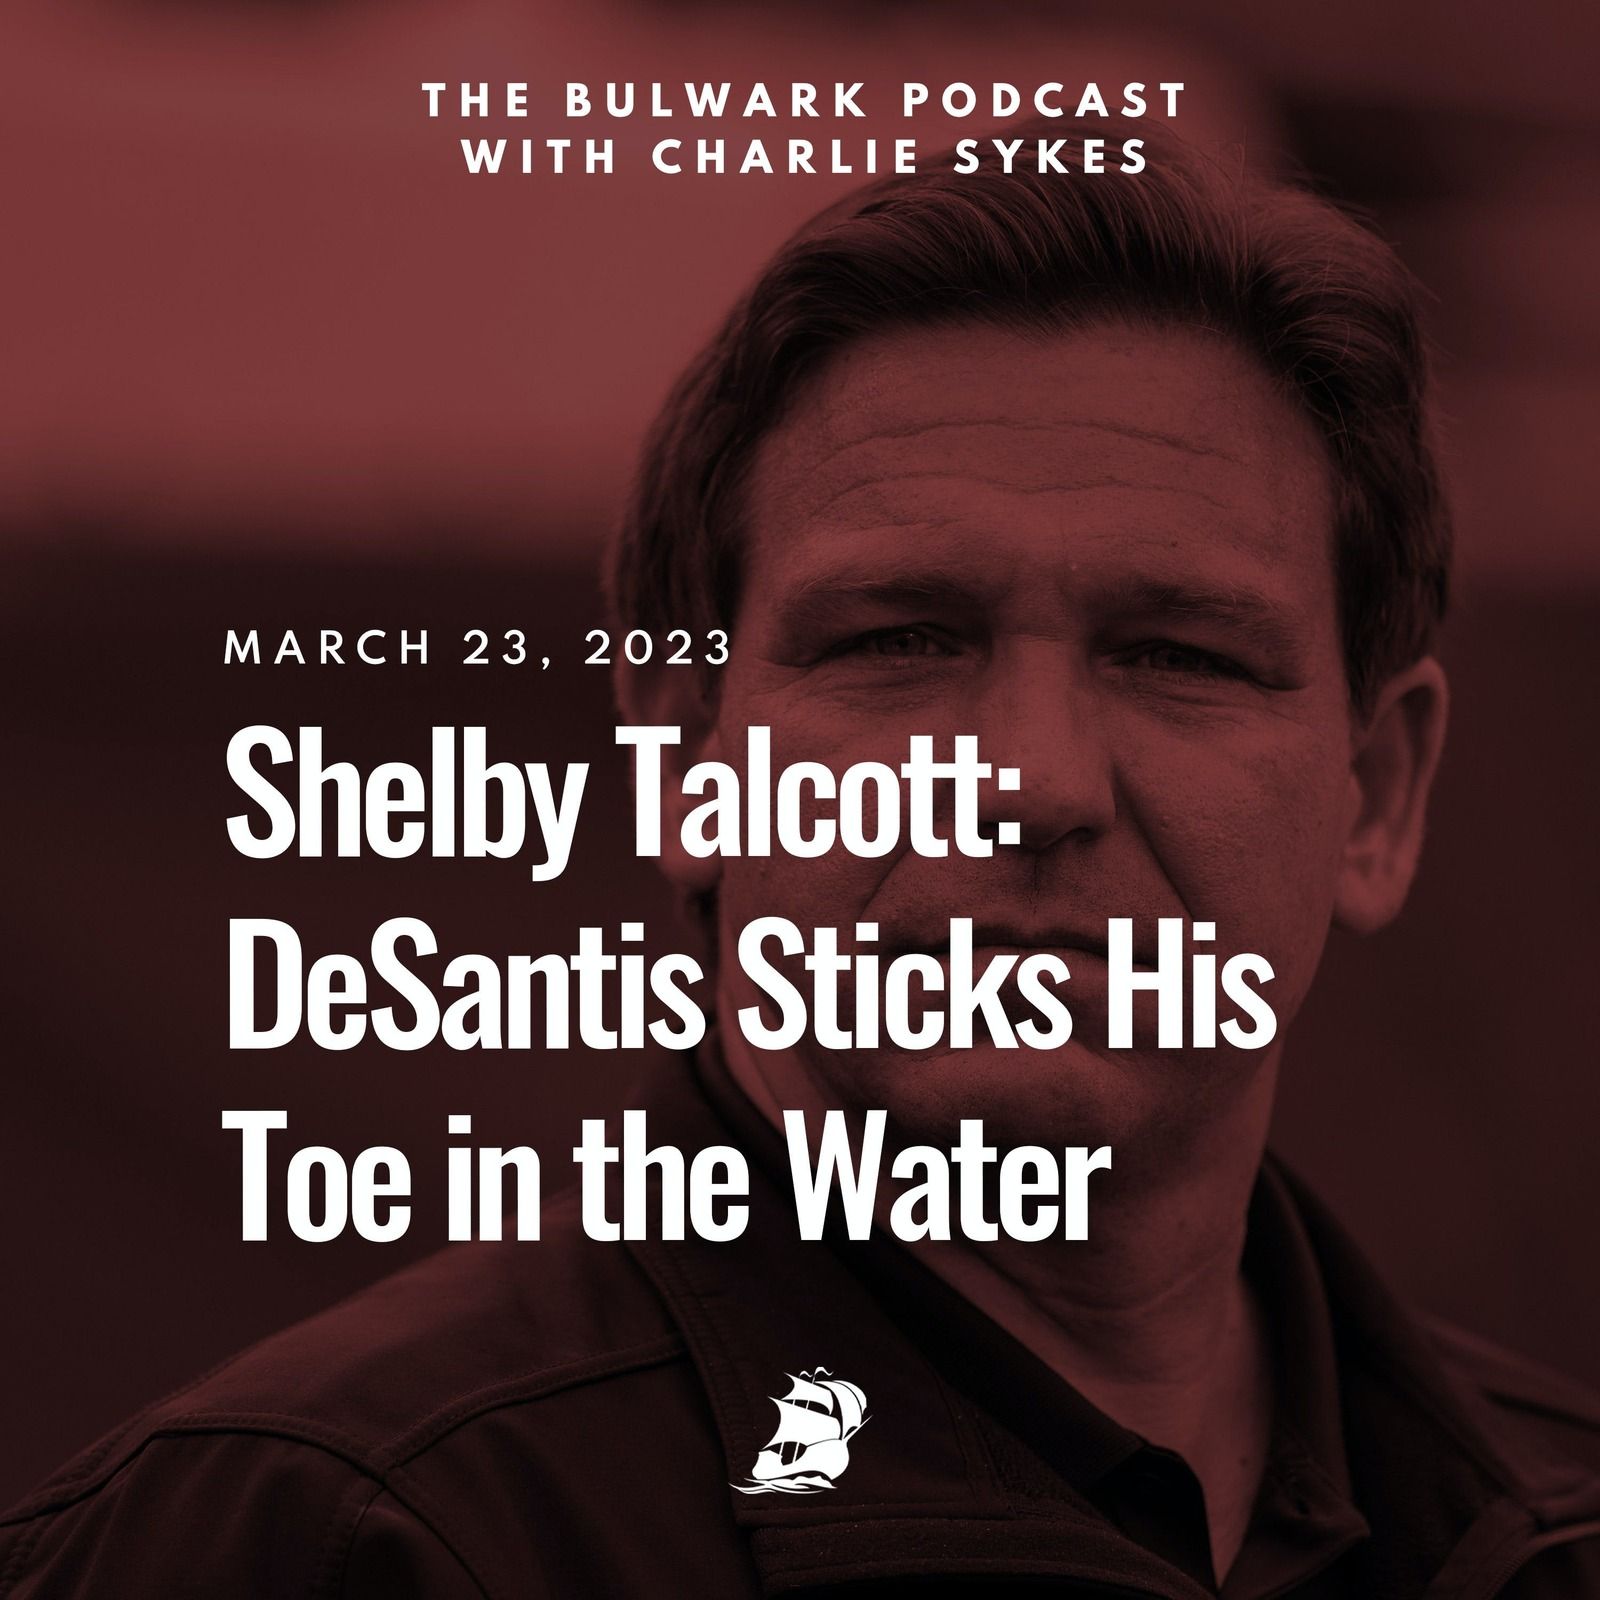 Shelby Talcott: DeSantis Sticks His Toe in the Water by The Bulwark Podcast